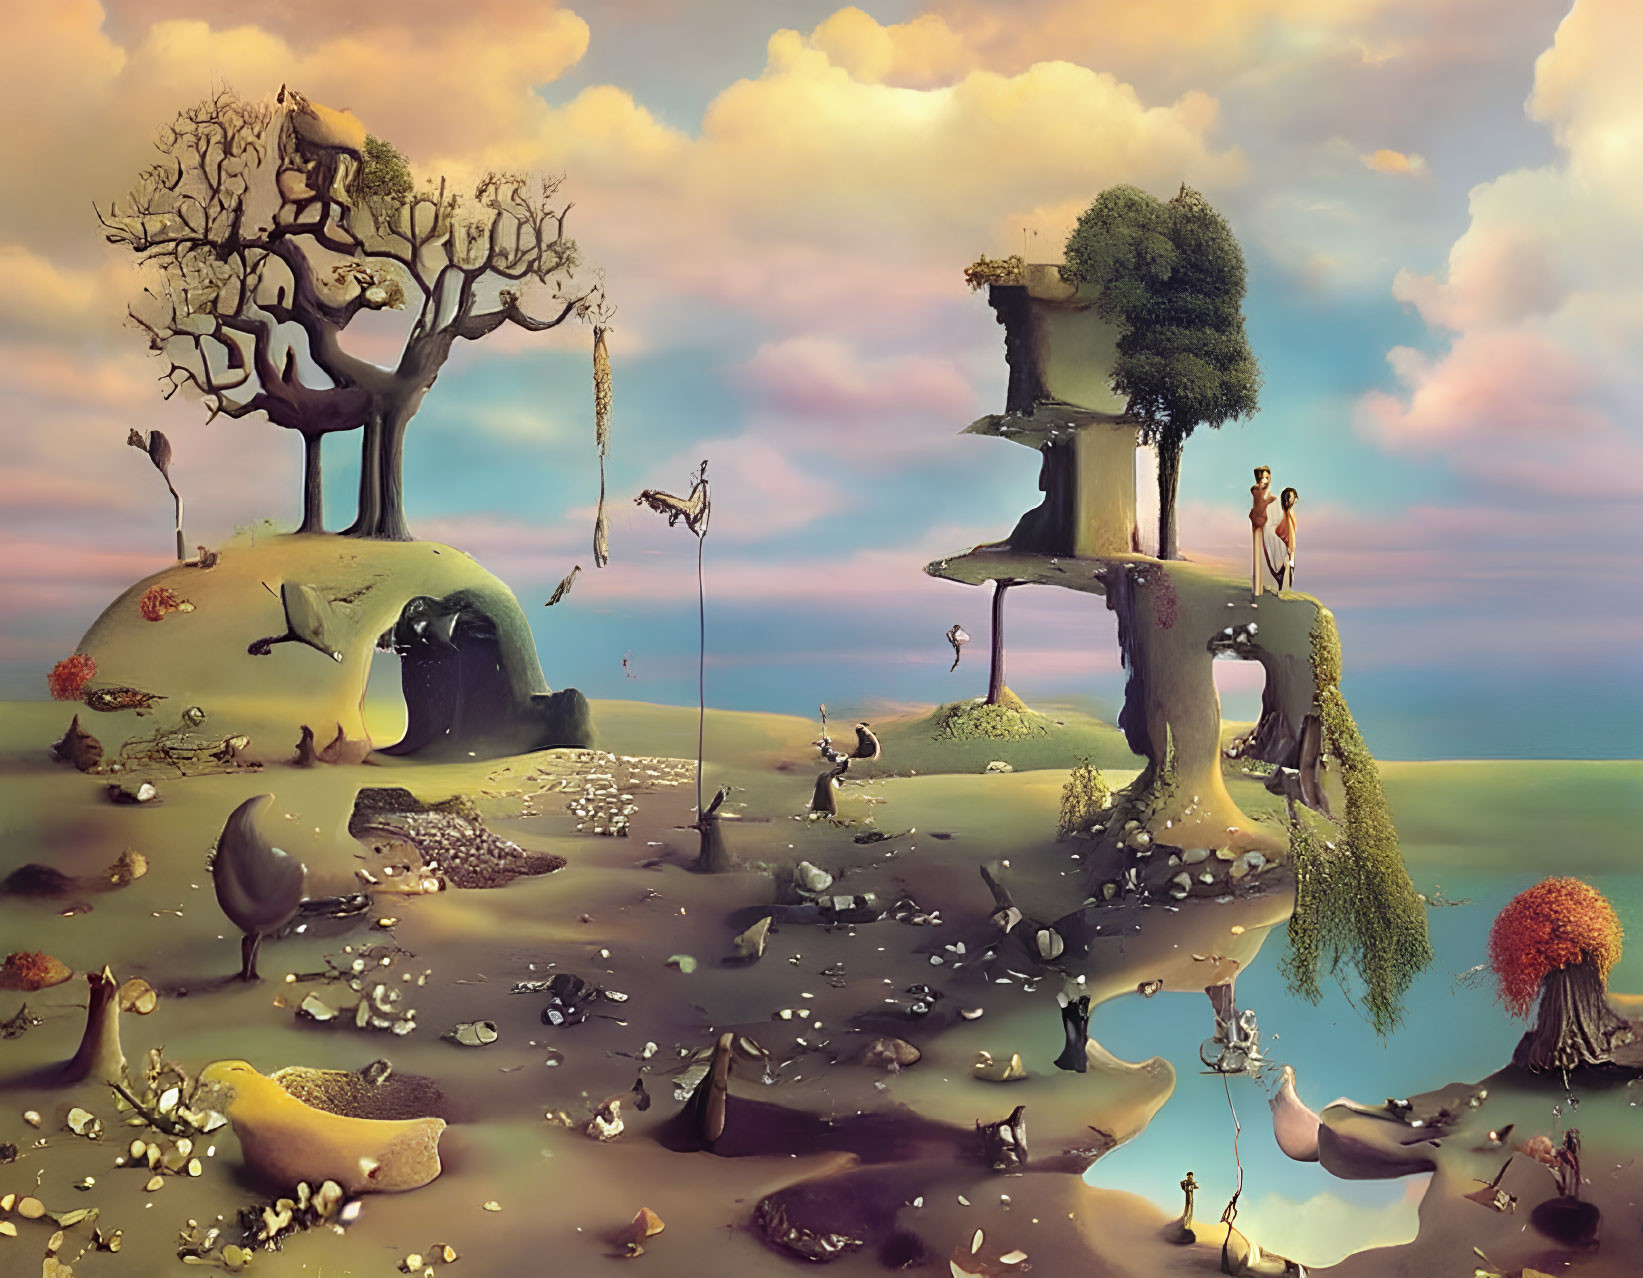 Surreal landscape with floating islands and whimsical creatures